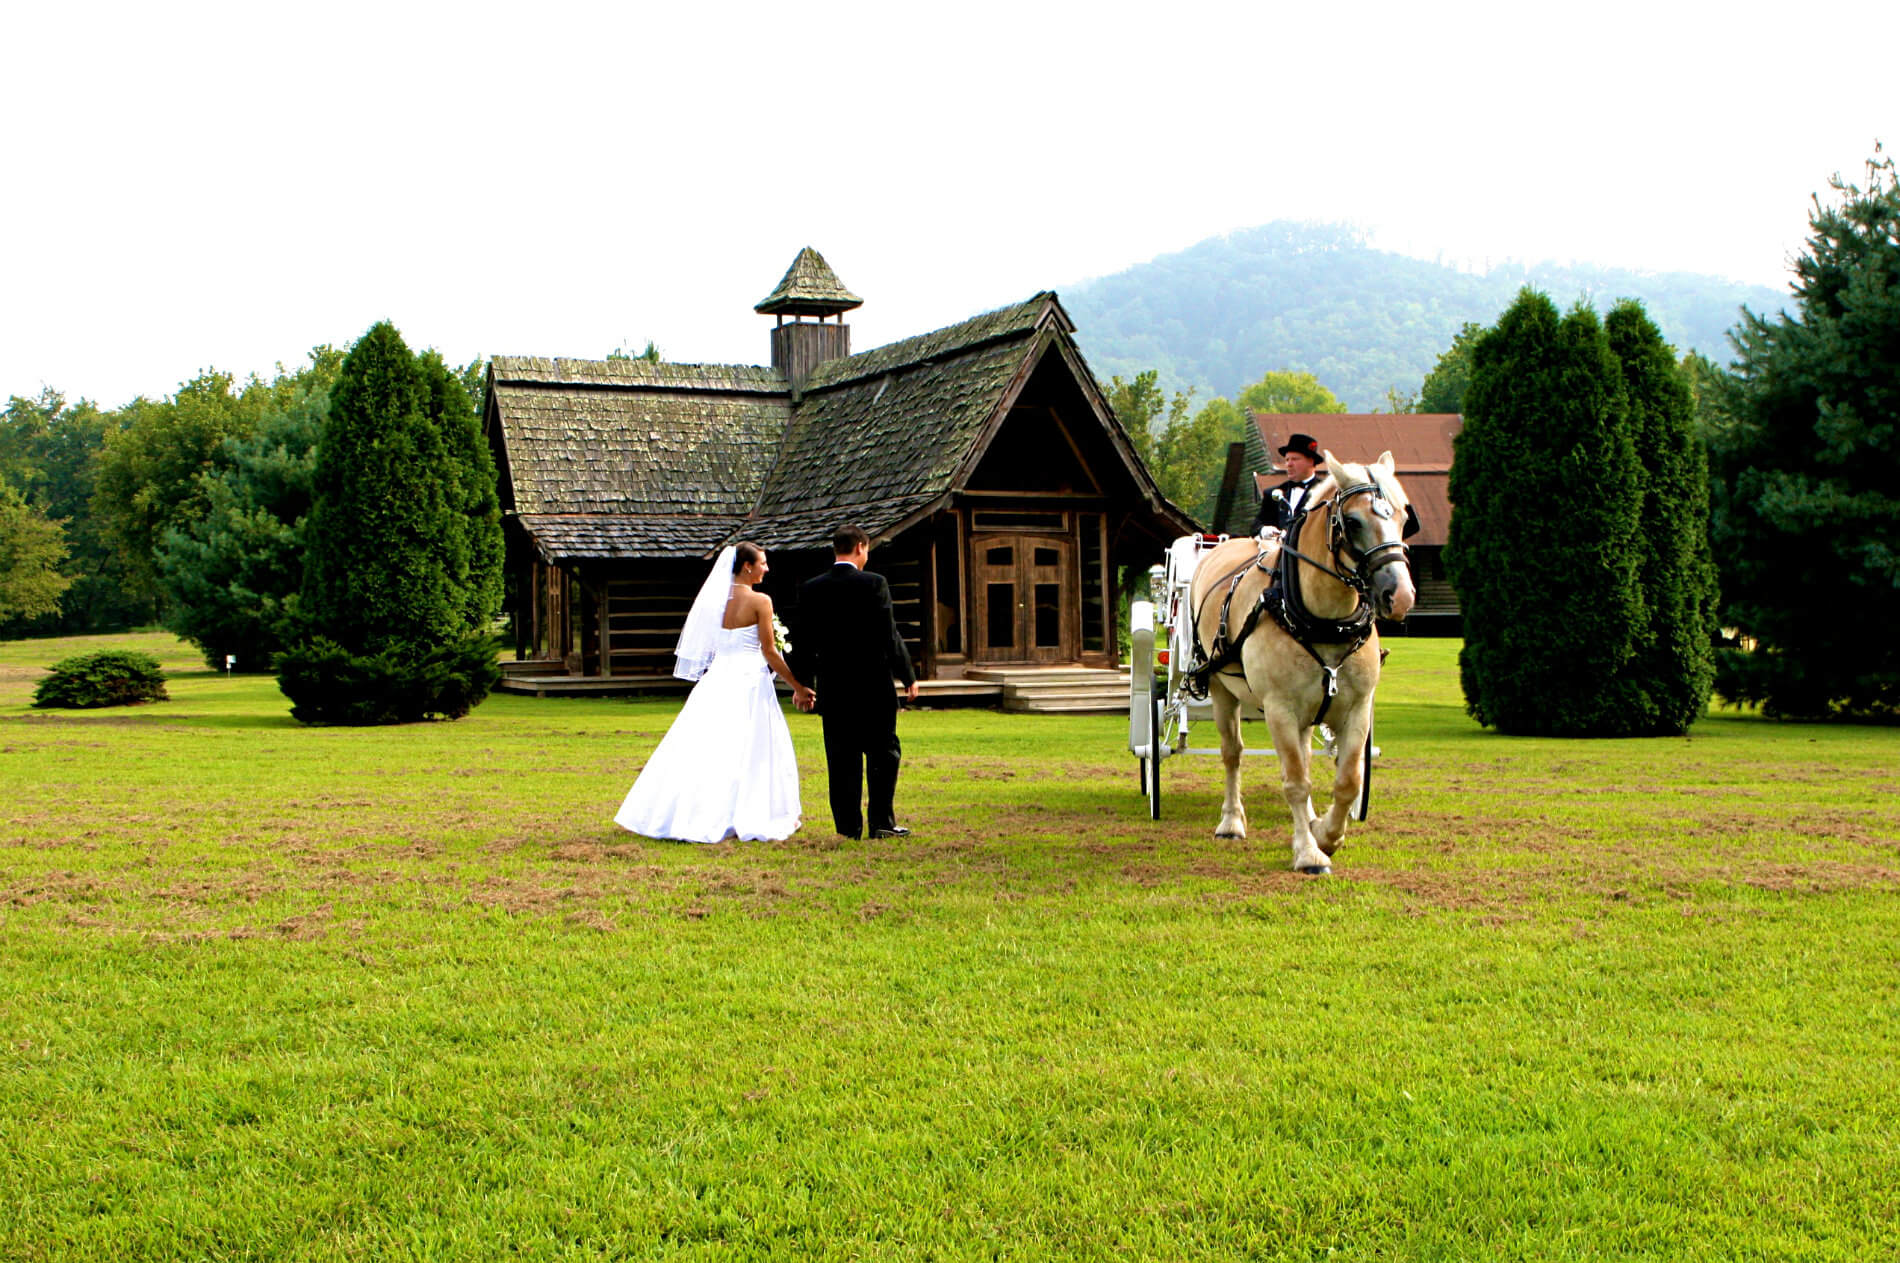 Wedding bride and groom standing next to white carriage with tuxedoed driver and tan horse